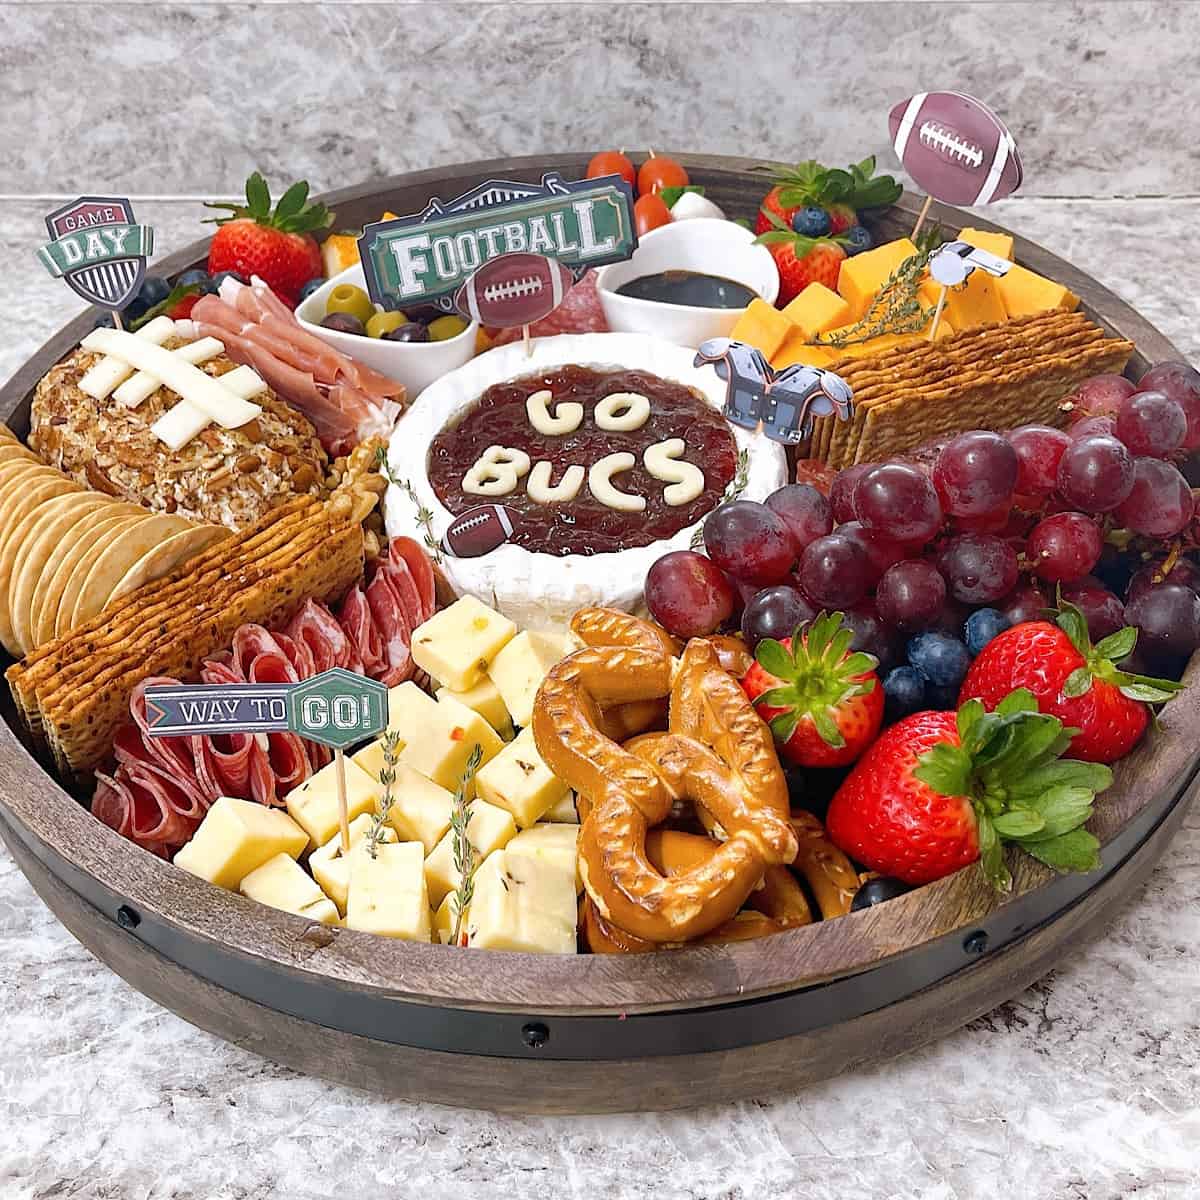 Football themed charcuterie board with meats and cheeses